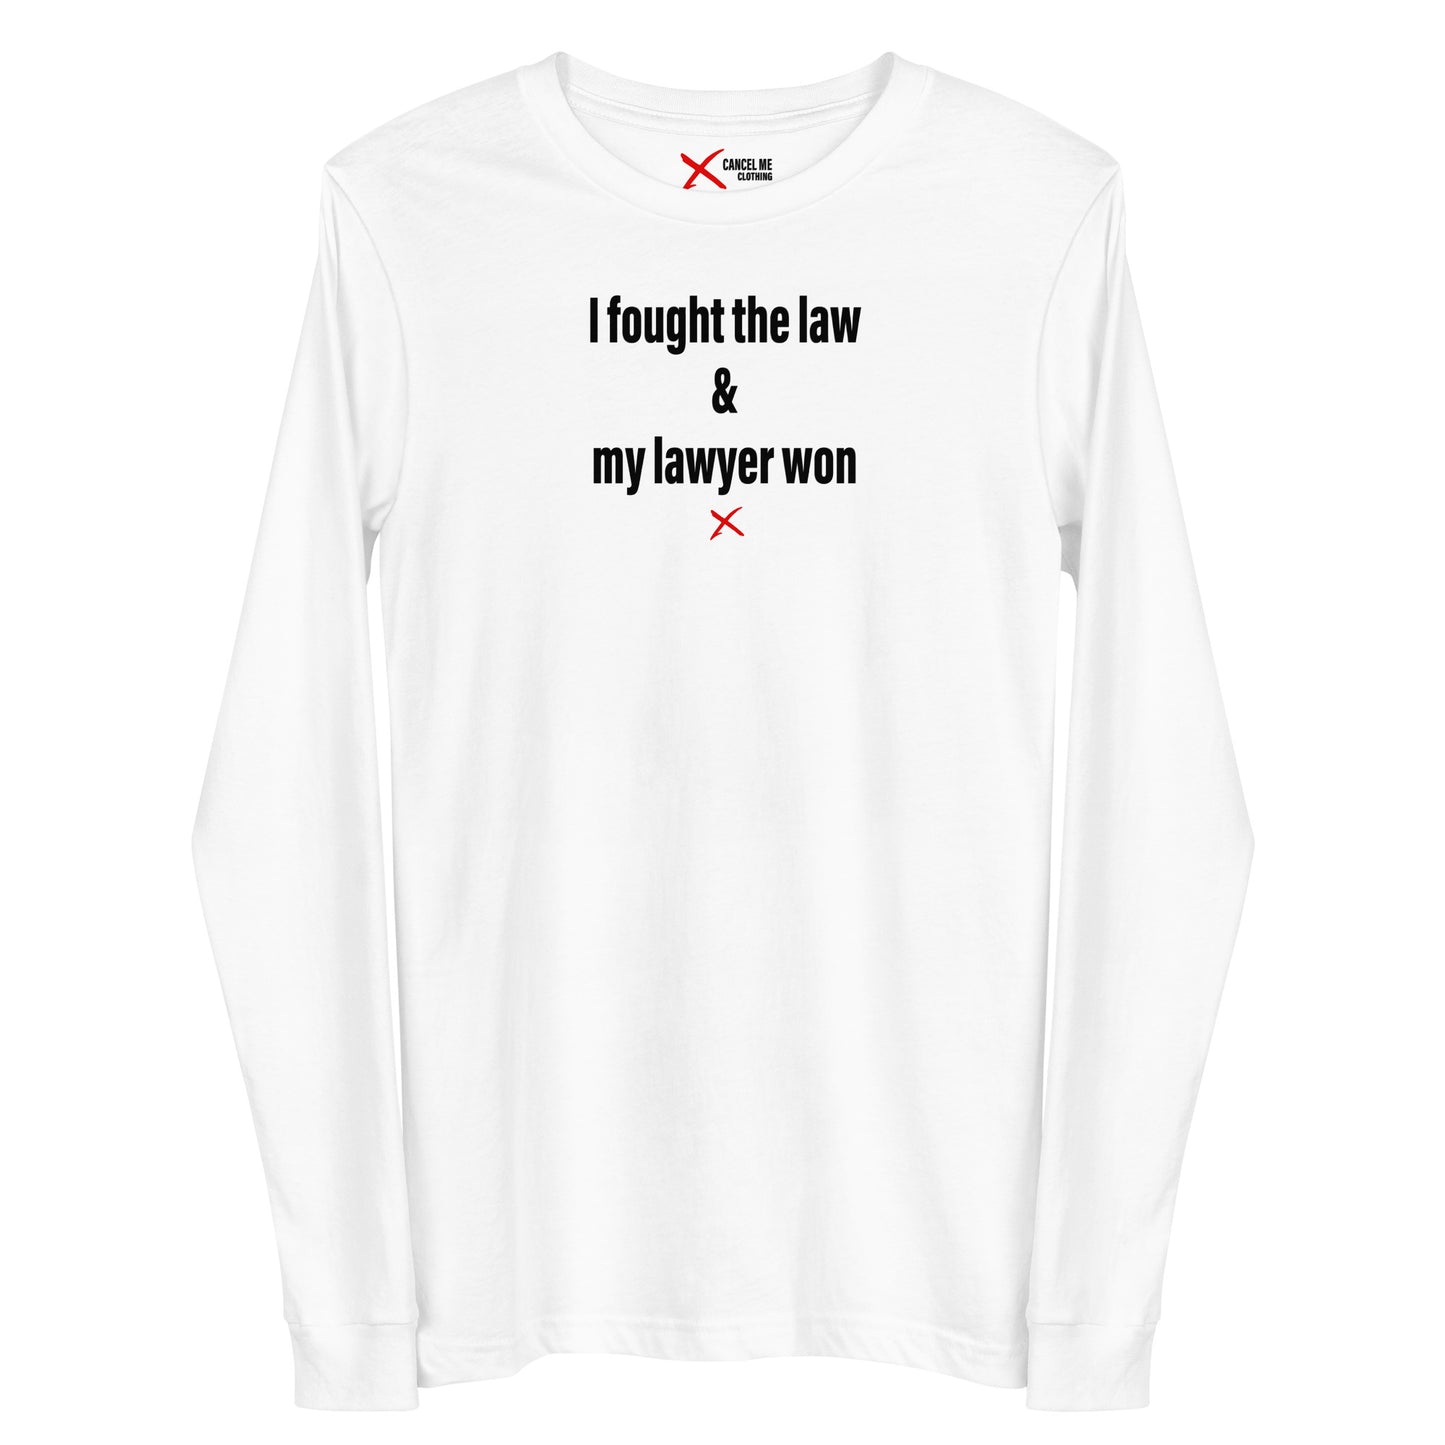 I fought the law & my lawyer won - Longsleeve